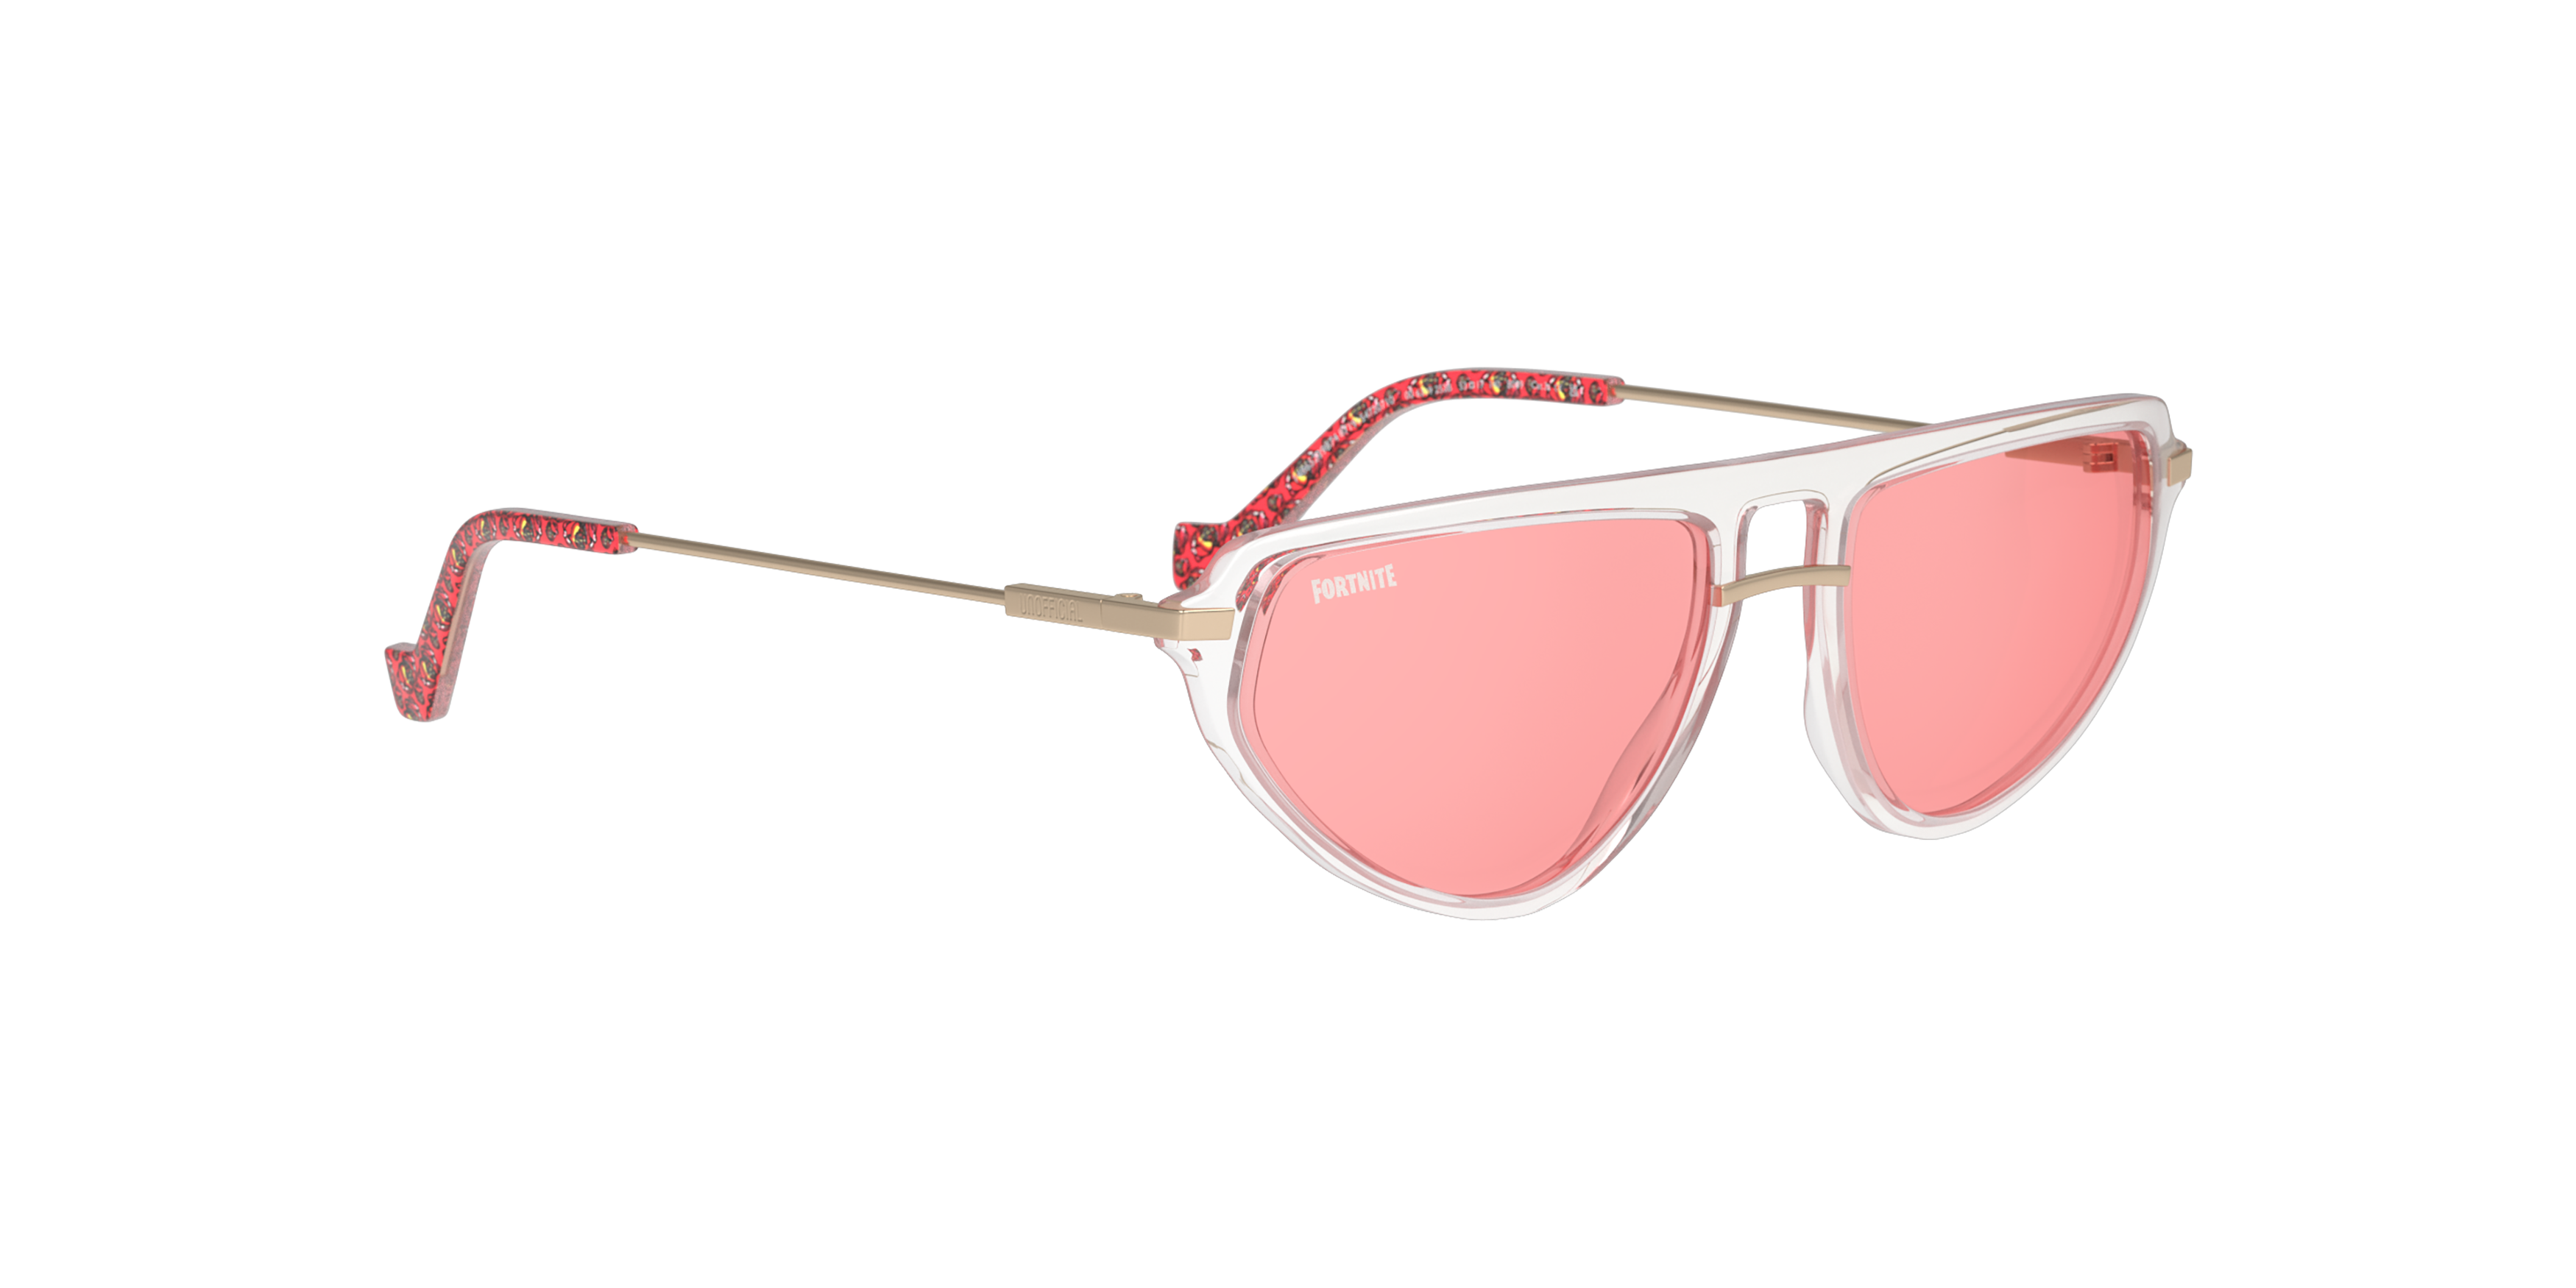 Angle_Right01 Fortnite with Unofficial UNSU0147 Sunglasses Pink / Transparent, Clear